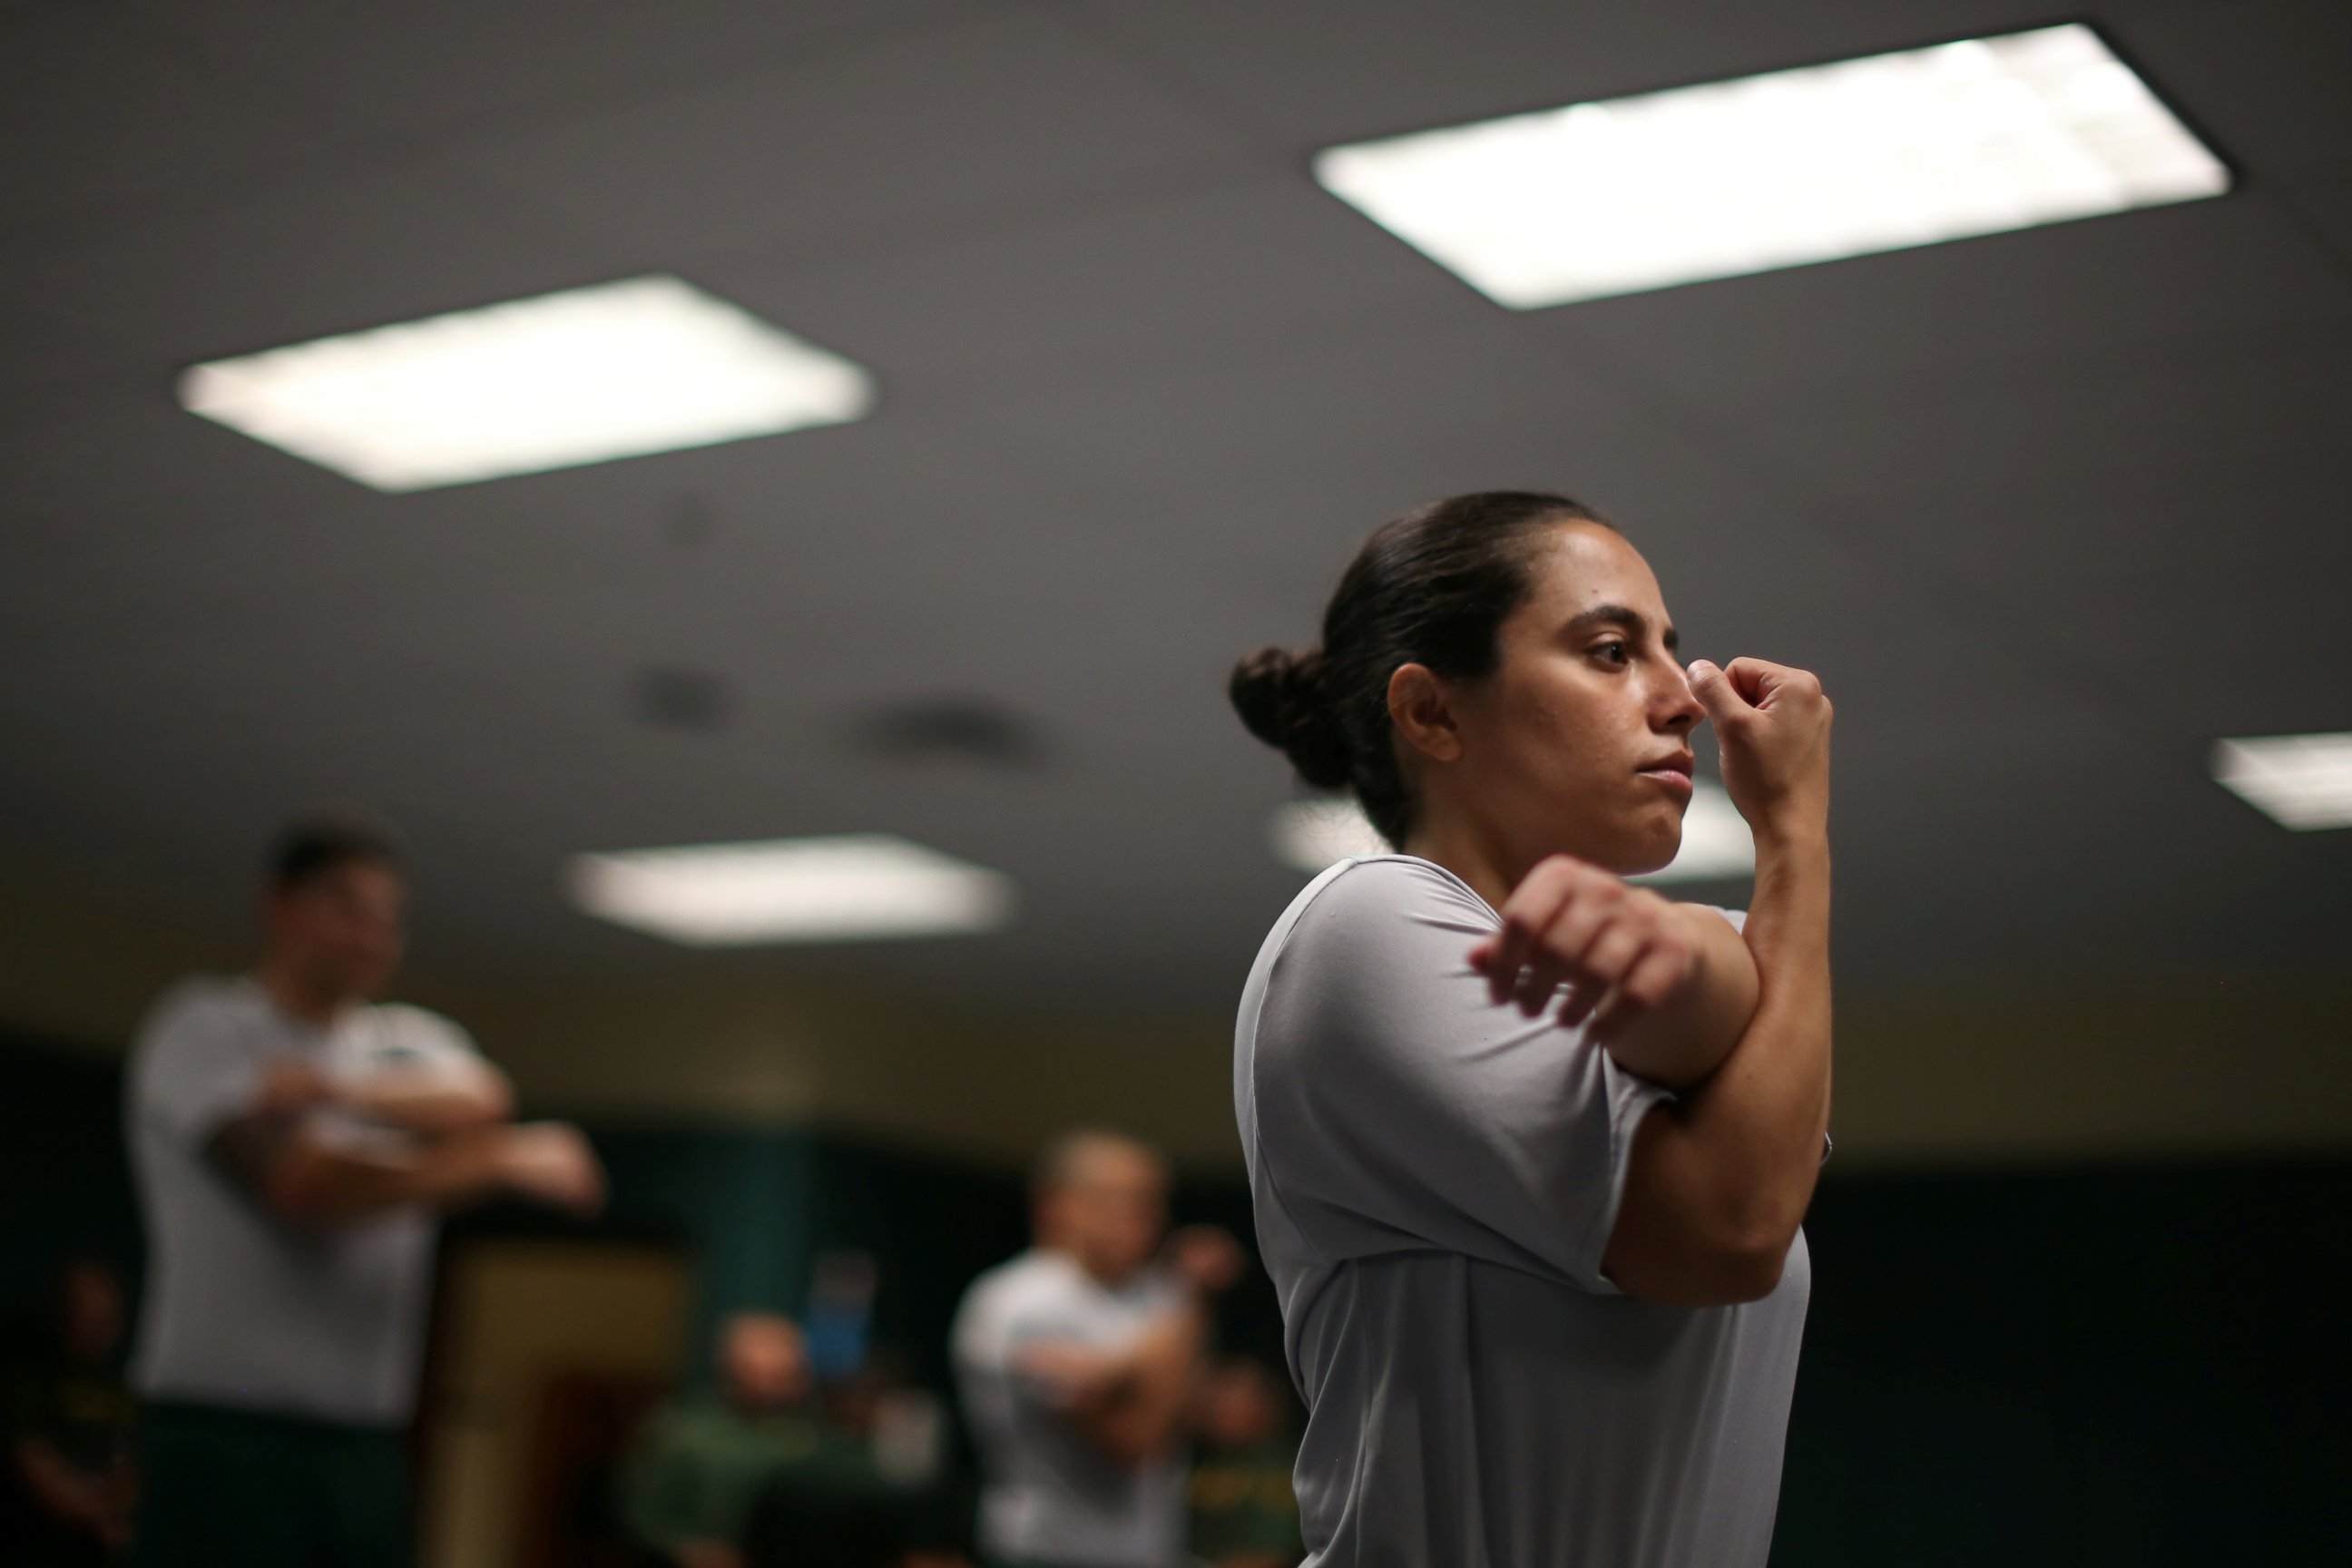 PHOTO: Border patrol trainee Stevany Shakare, from Iraq, takes part in a physical training class at the United States Border Patrol Academy in Artesia, New Mexico, June 8, 2017.